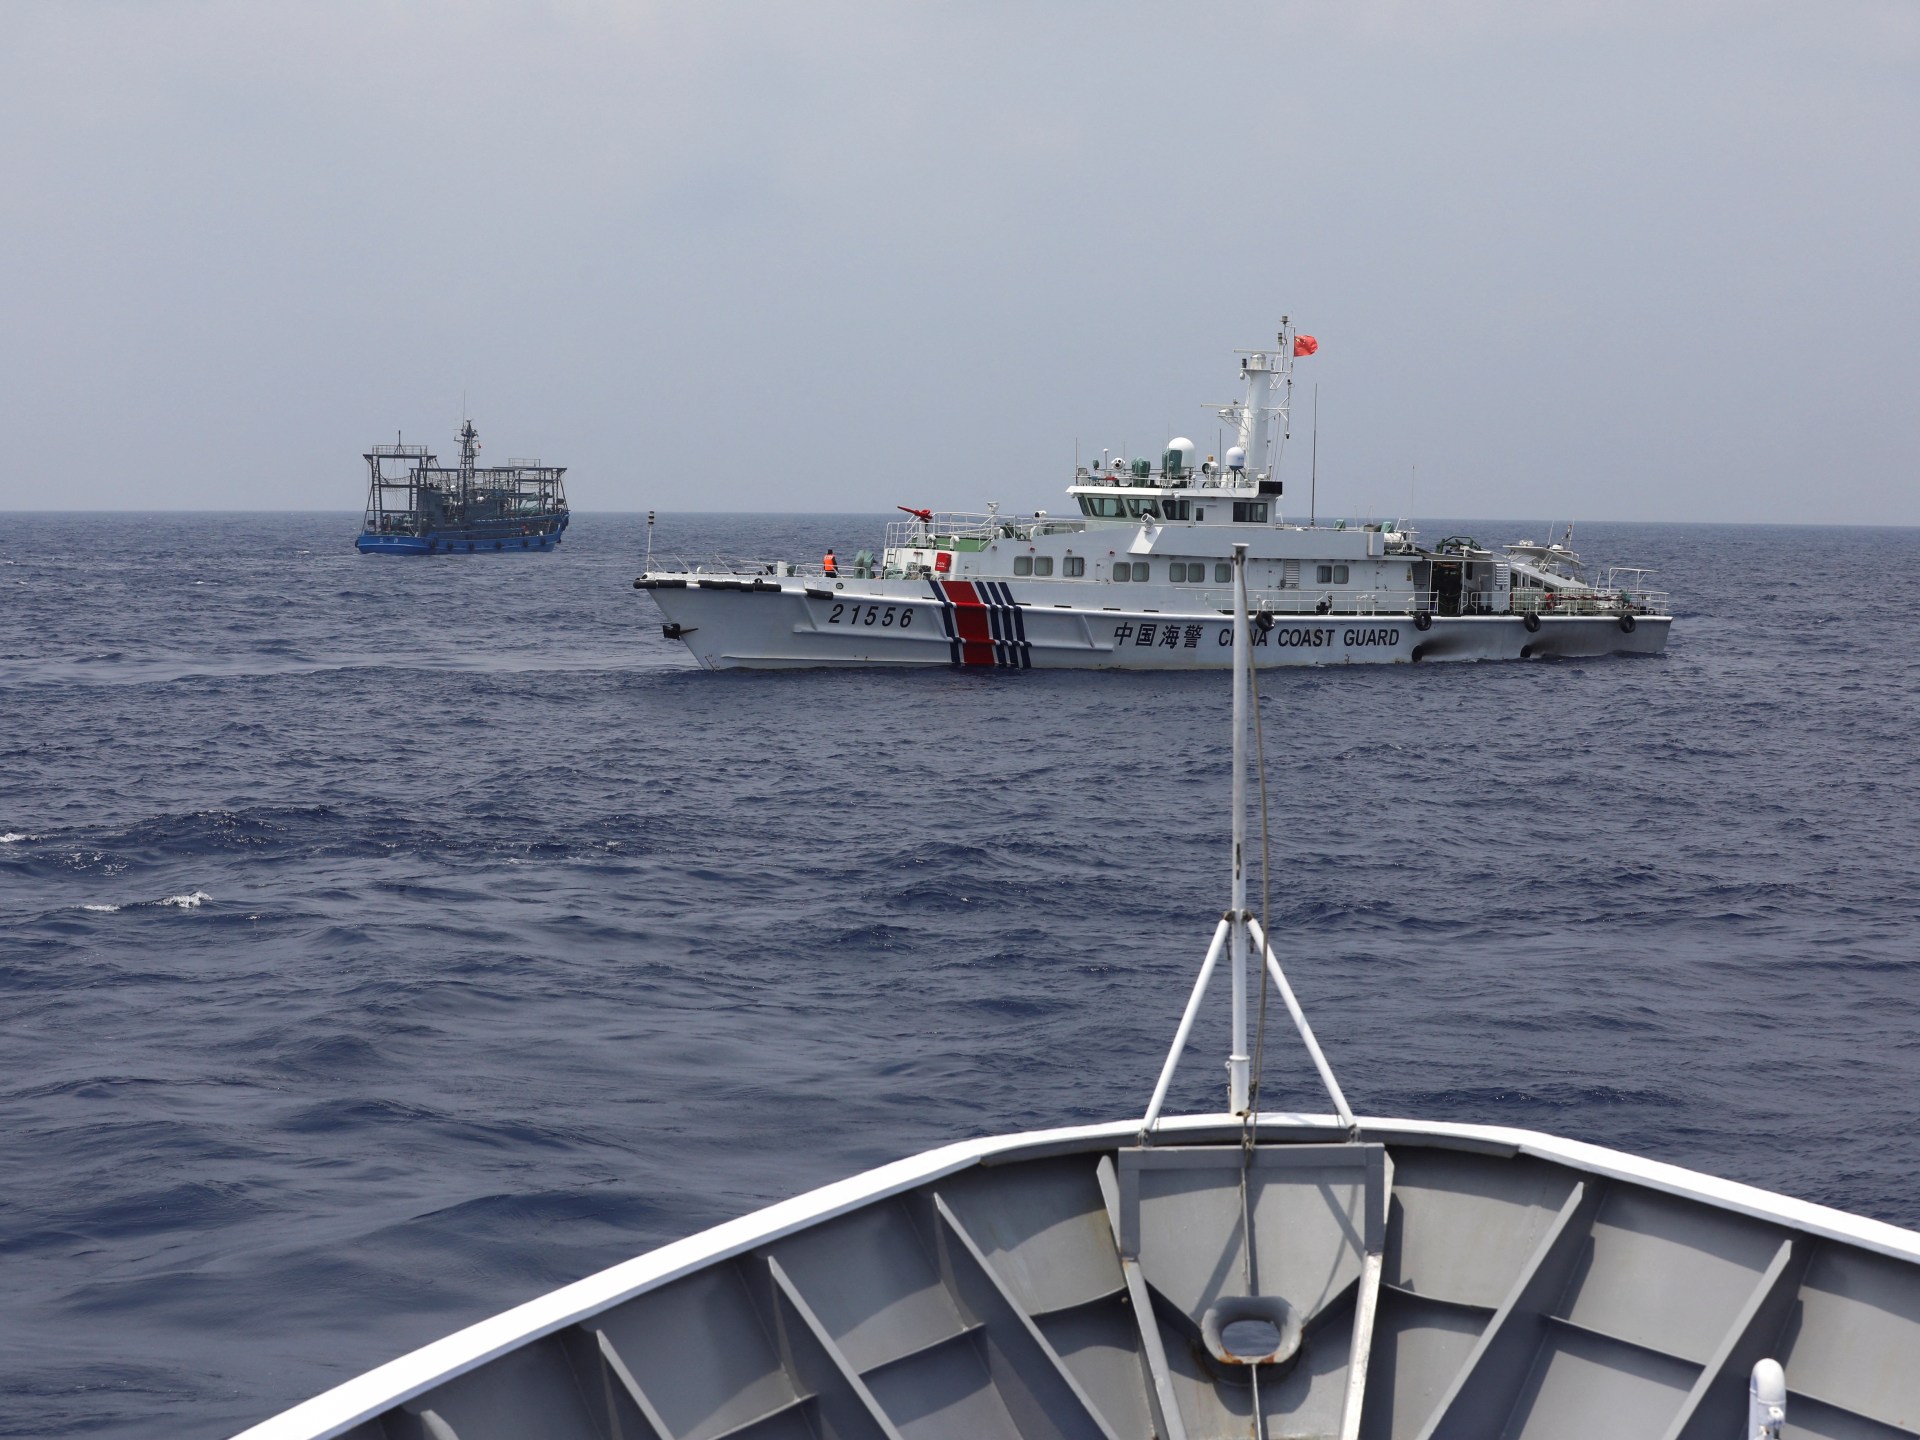 Philippines and China accuse each other of South China Sea collisions | South China Sea News #Philippines #China #accuse #South #China #Sea #collisions #South #China #Sea #News